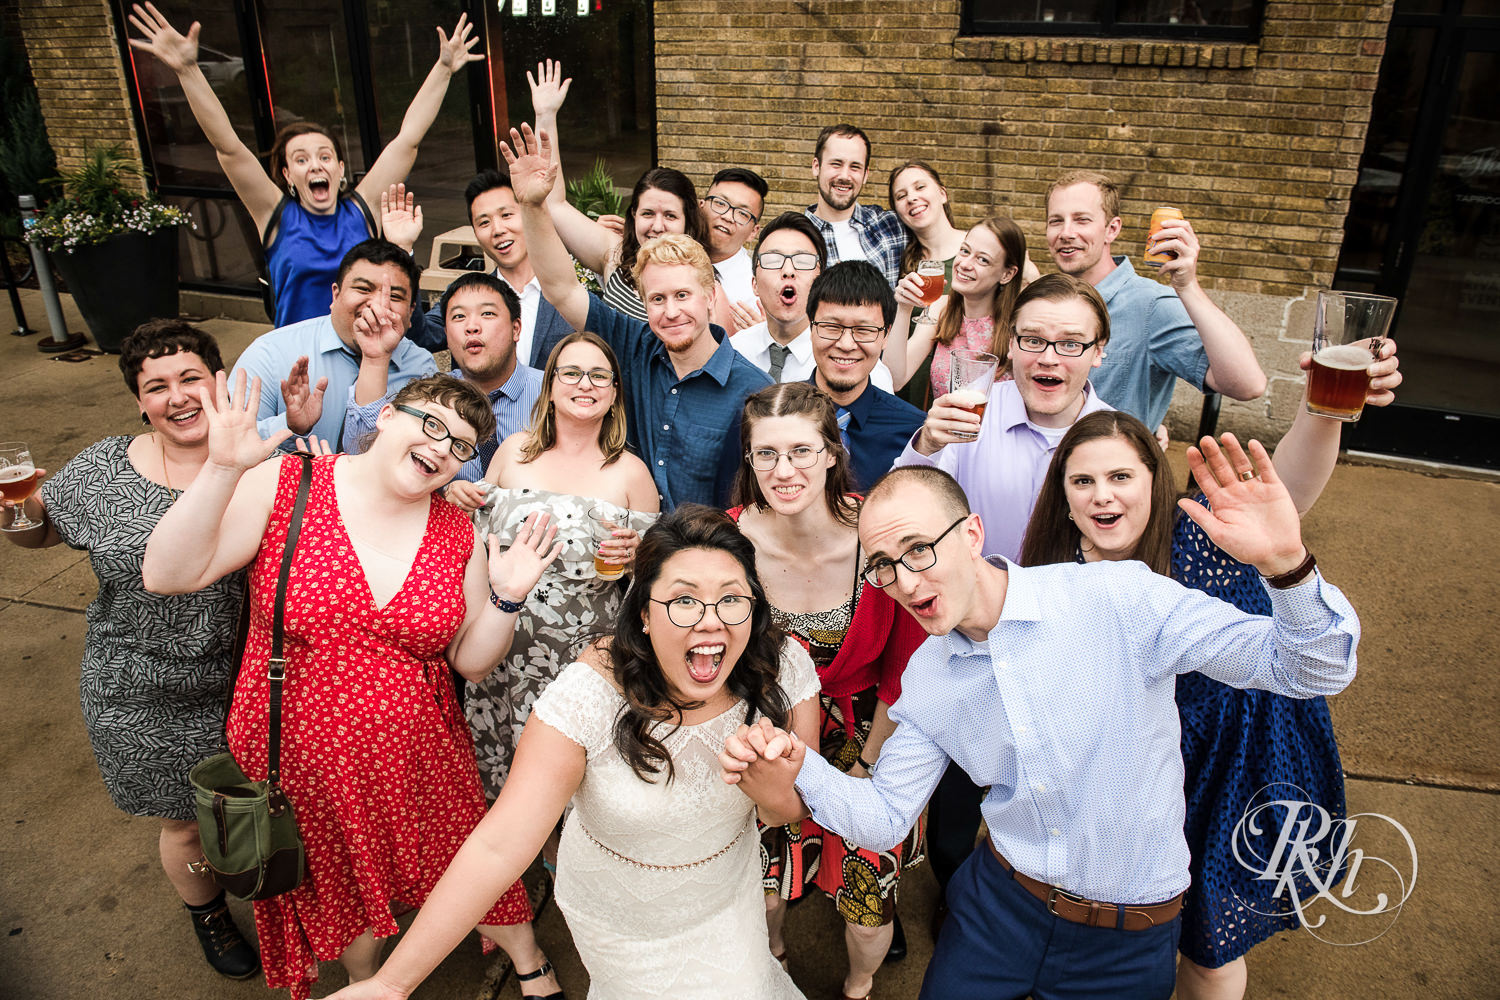 Bride and groom cheer with guests during brewery wedding reception at 612 Brew in Minneapolis, Minnesota.